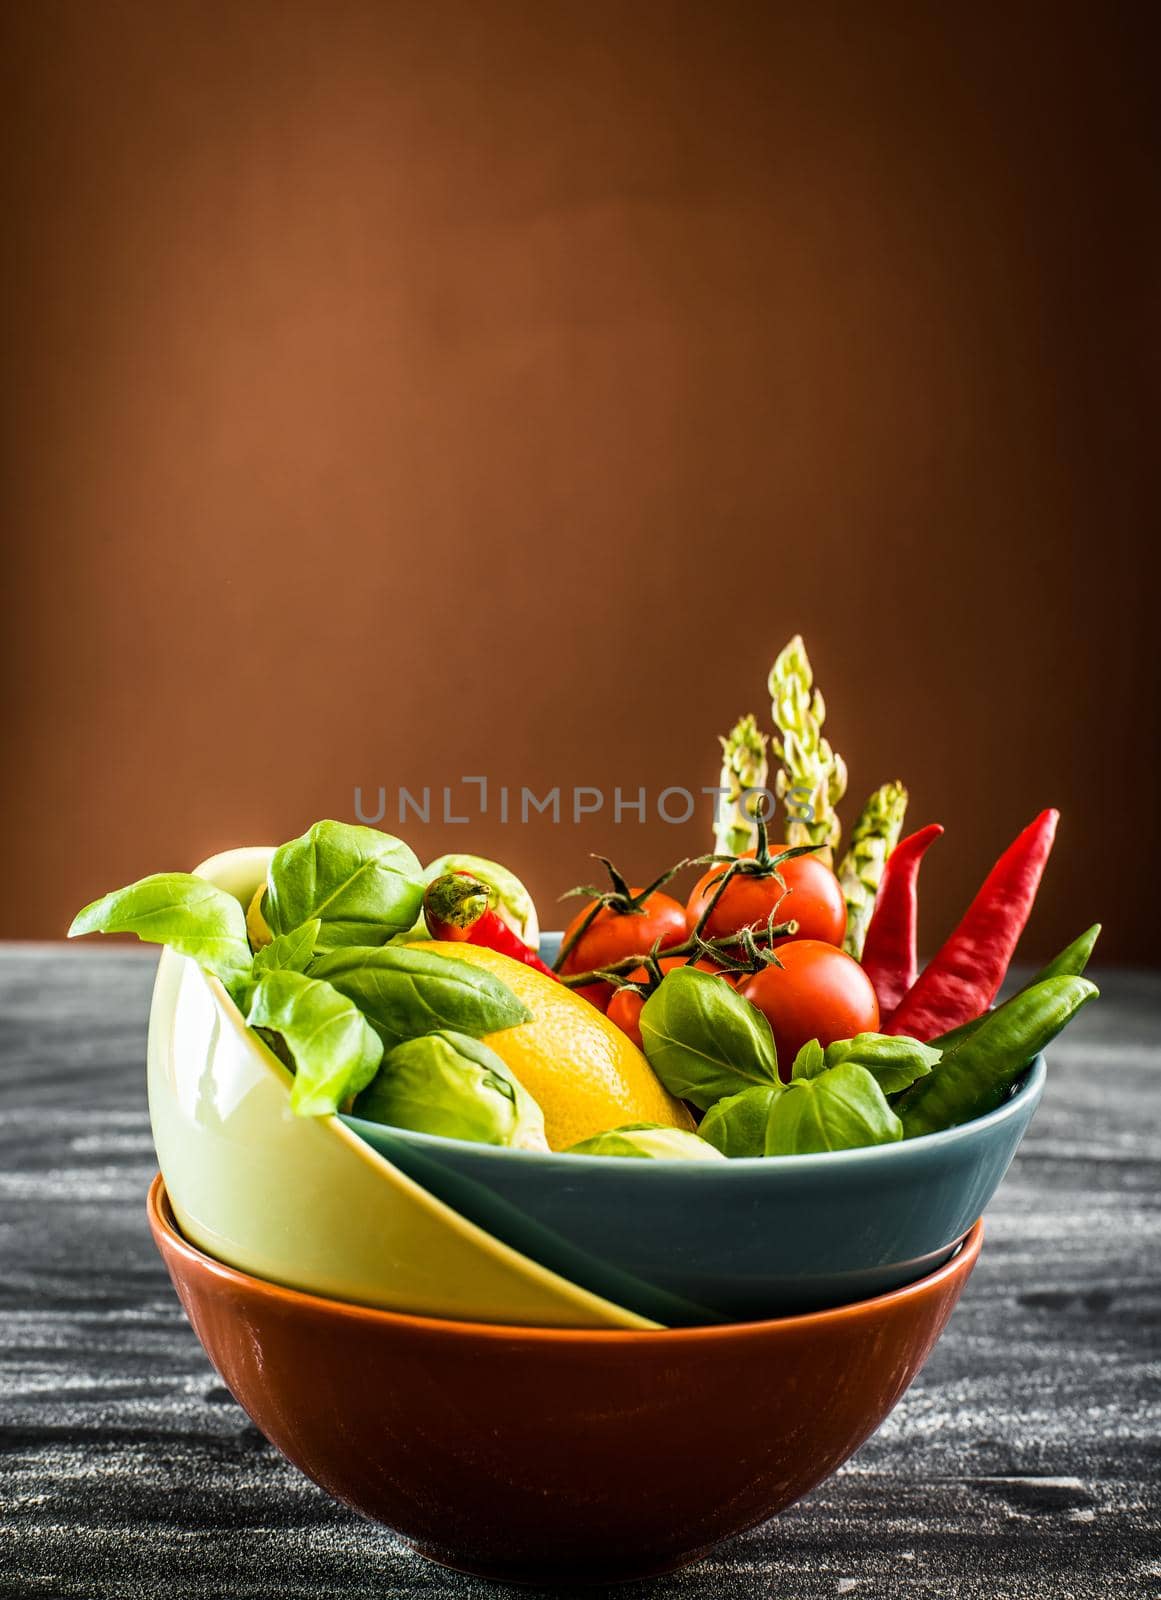 Fresh vegetables in a bowl on the table with brown background